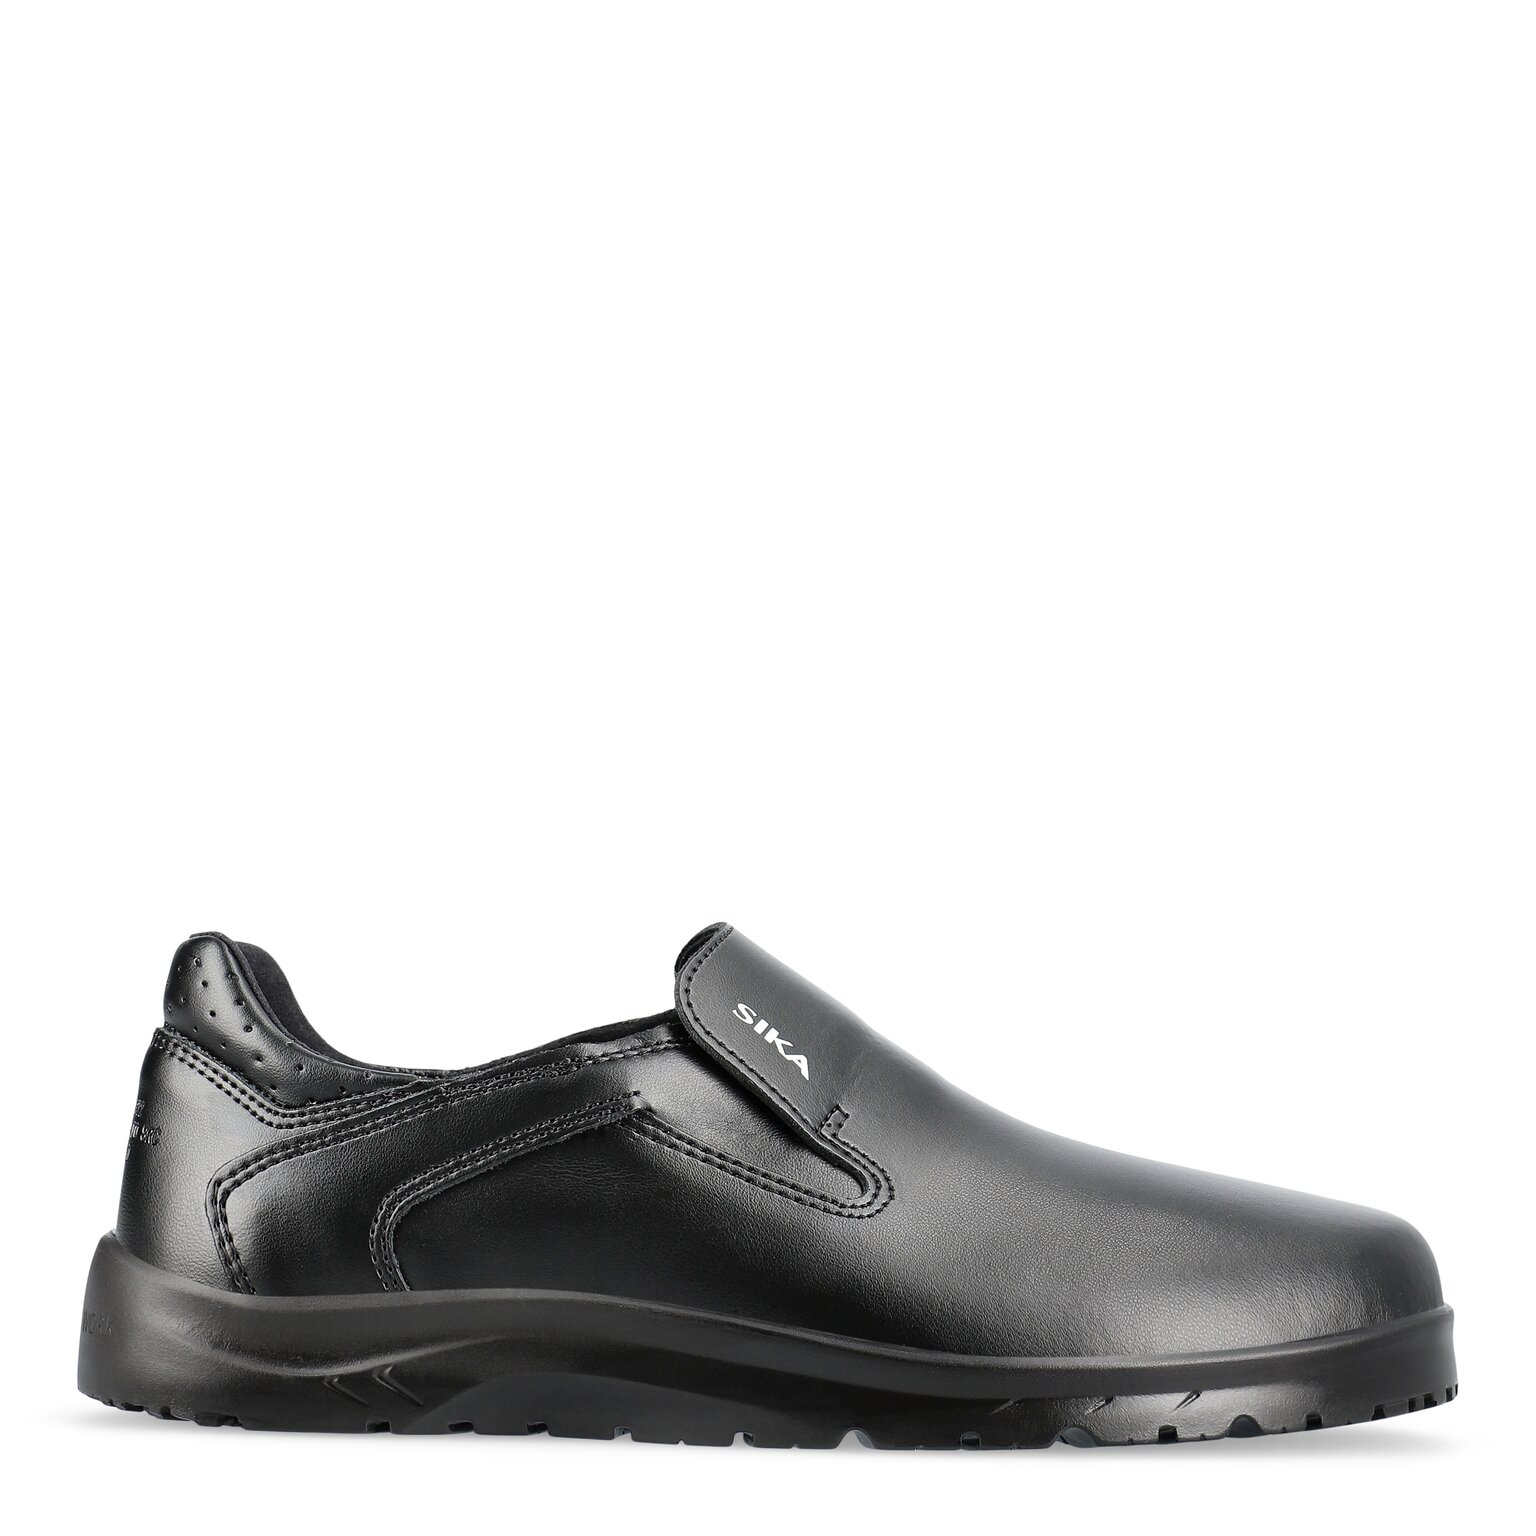 Fusion Slip On - 36 - Sika Footwear | Industry Shoes and Footwear